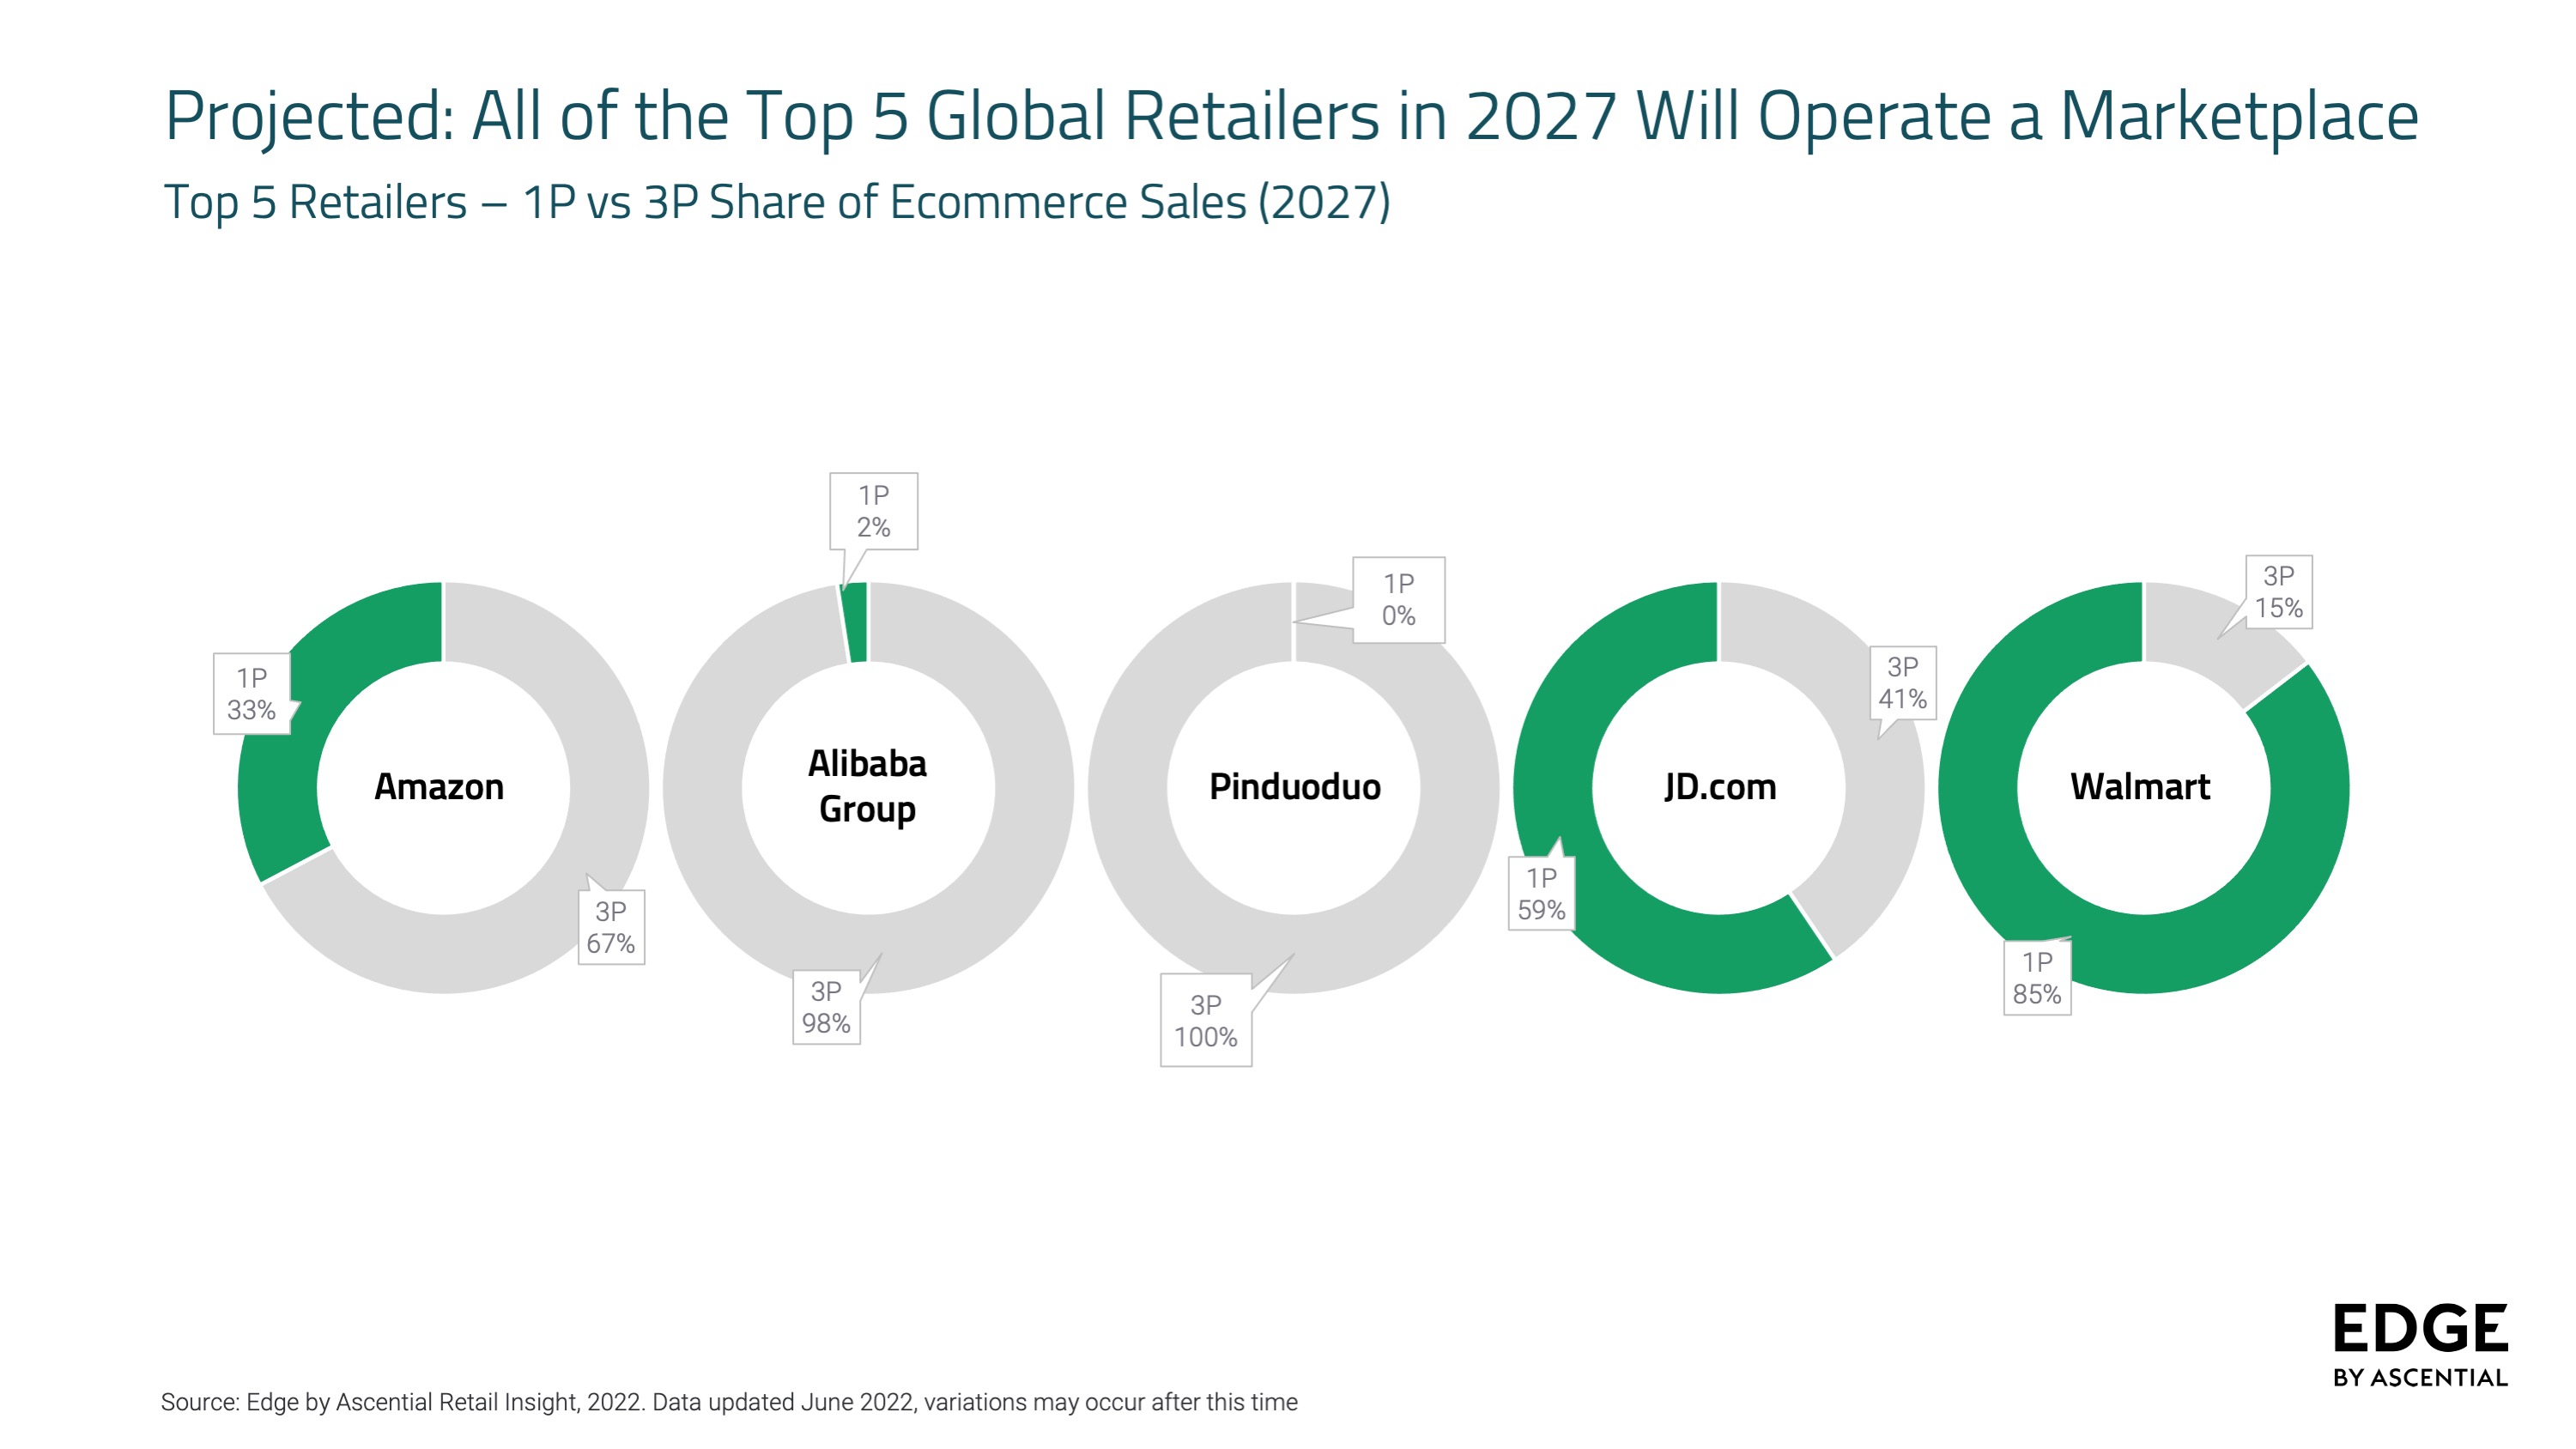 Top 5 Retailers - 1P vs 3P Share of Ecommerce Sales (2027)